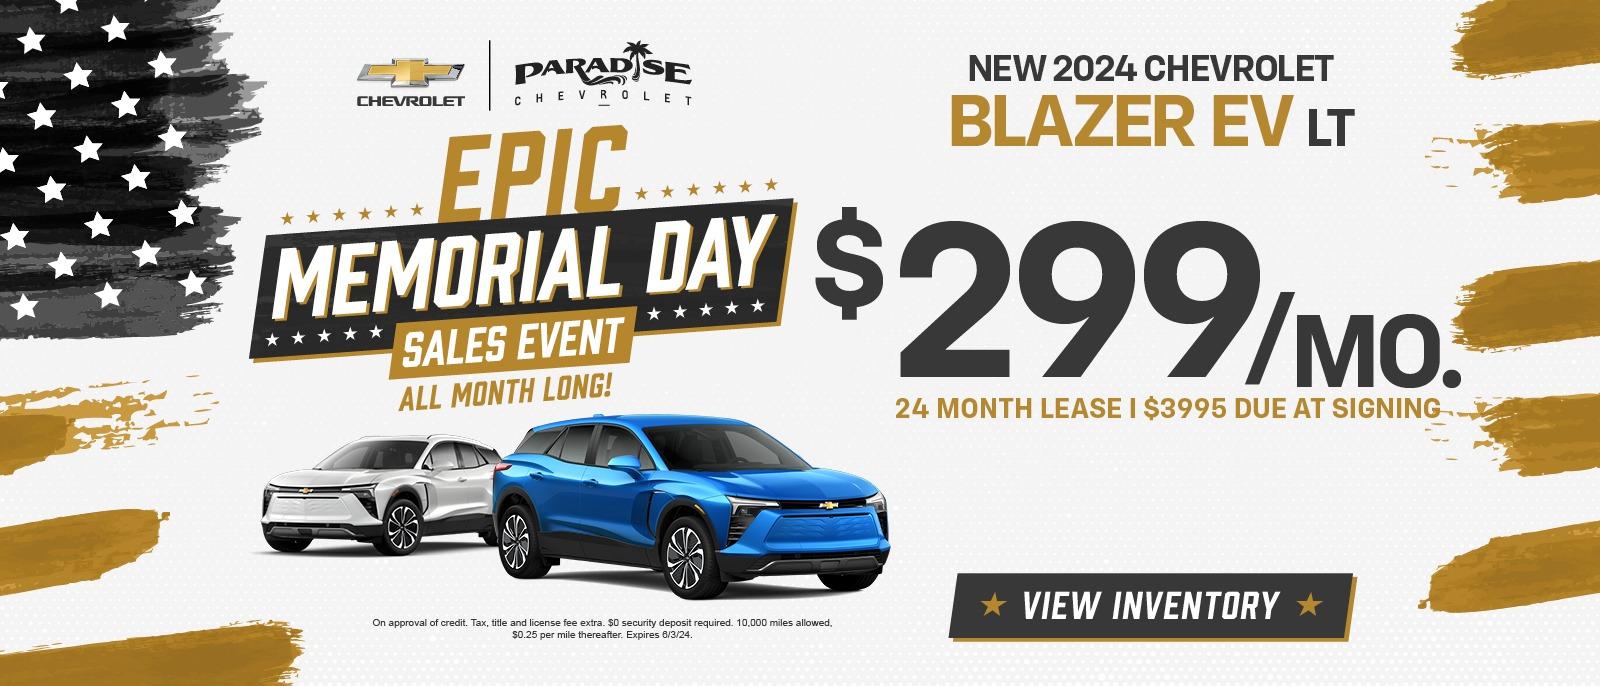 Lease a 2024 Blazer EV for just $299/mo